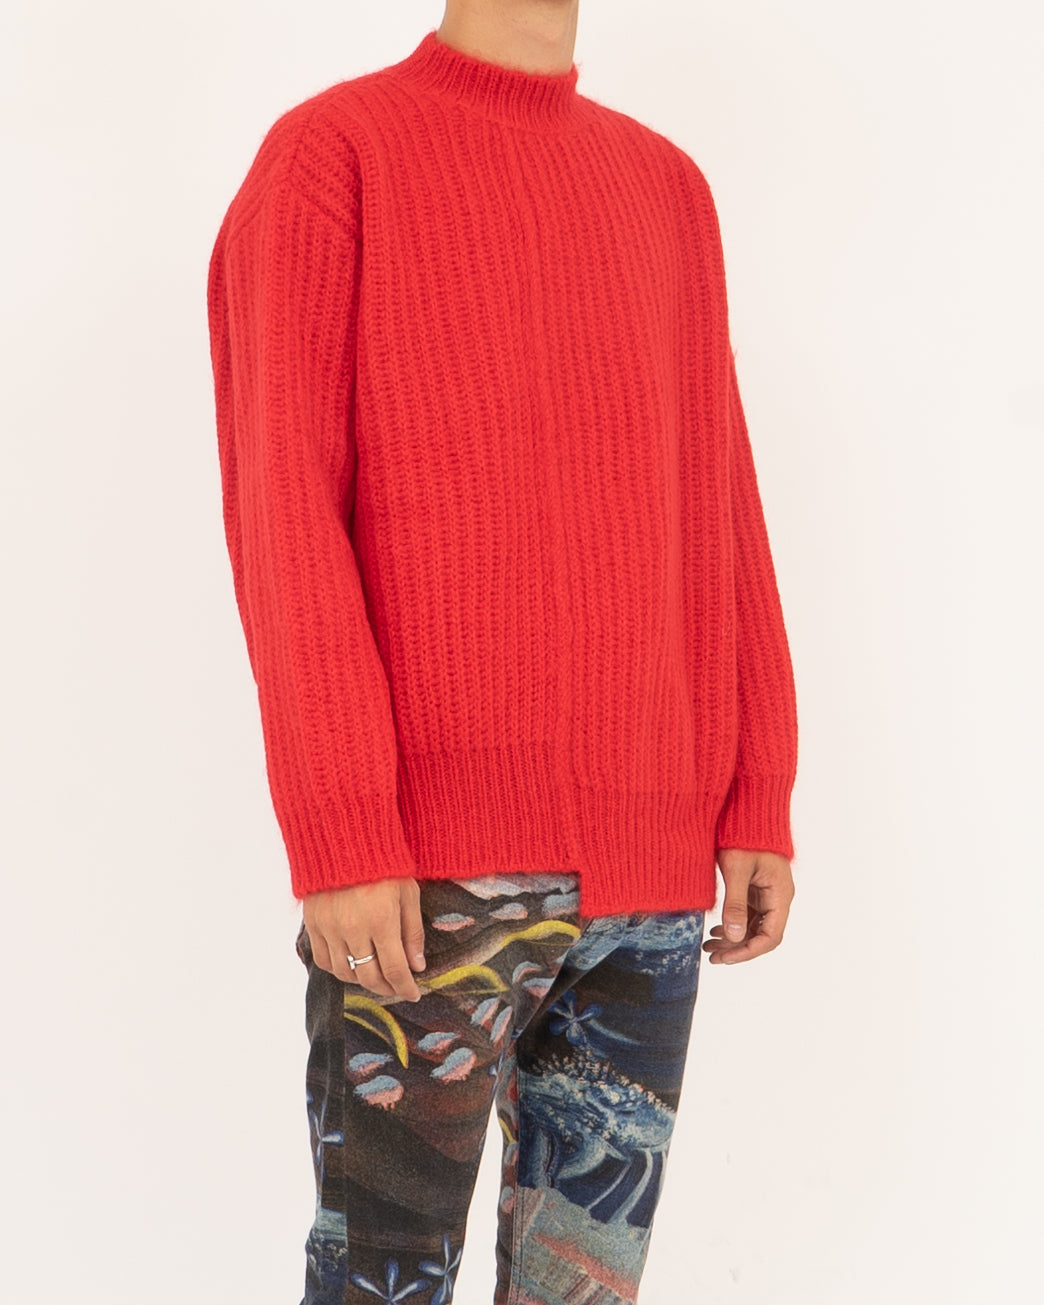 FW18 Oversized Red Mohair Knit